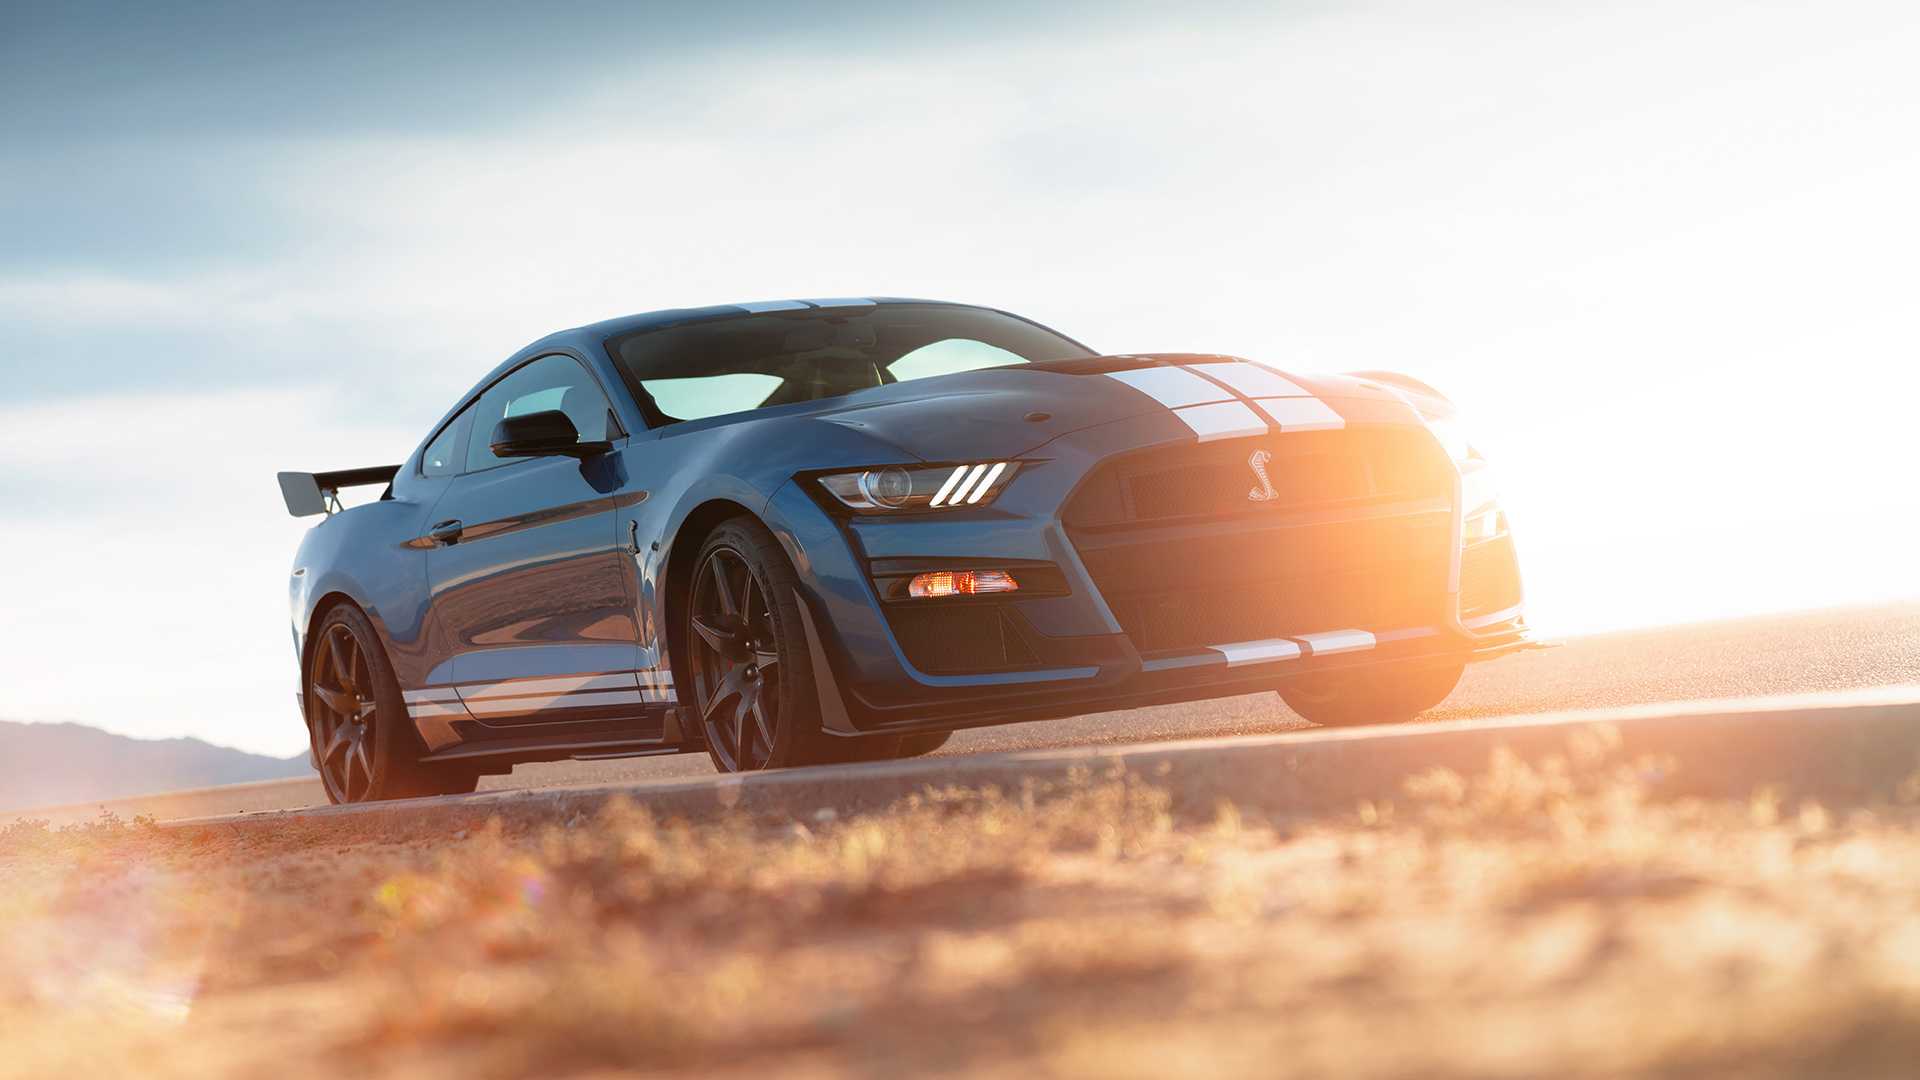 Ford Mustang Shelby GT500 Priced Below $74K, Can Surpass $100K